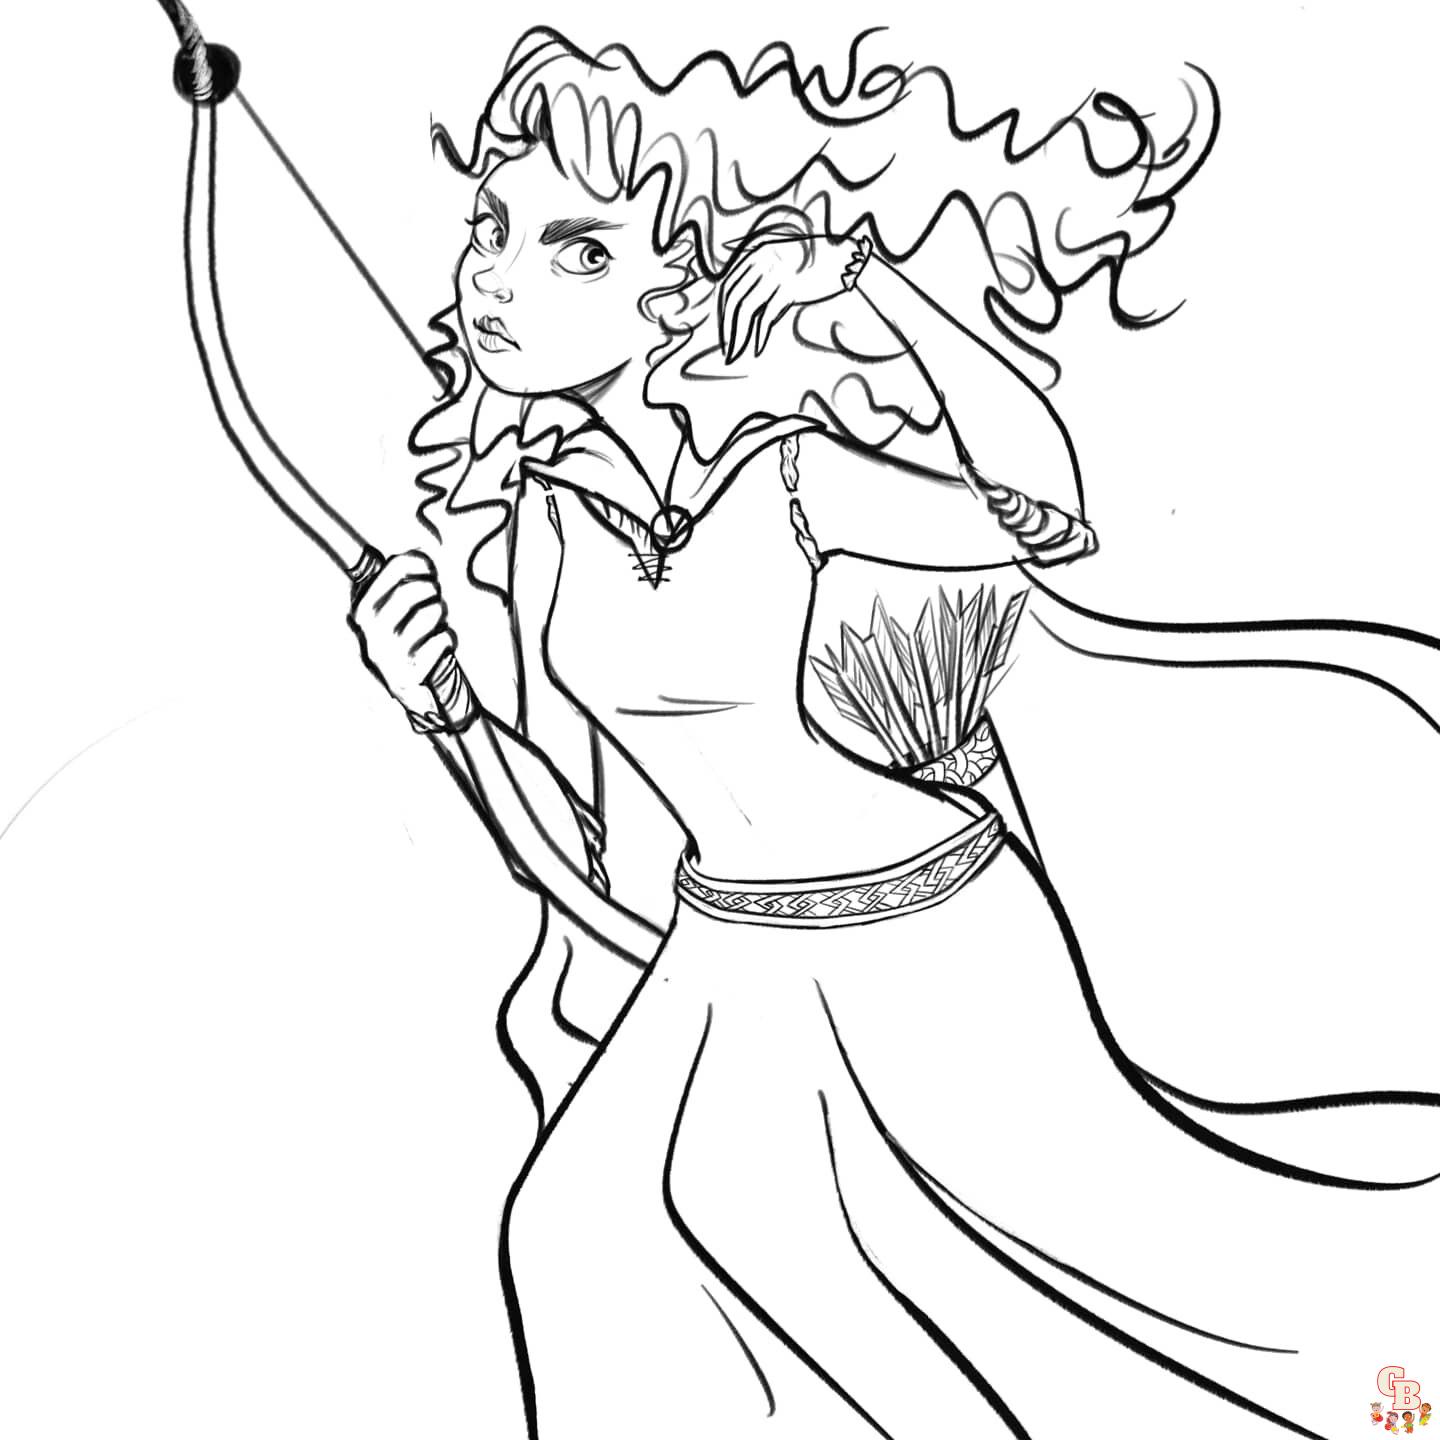 Merida Archery Coloring Pages